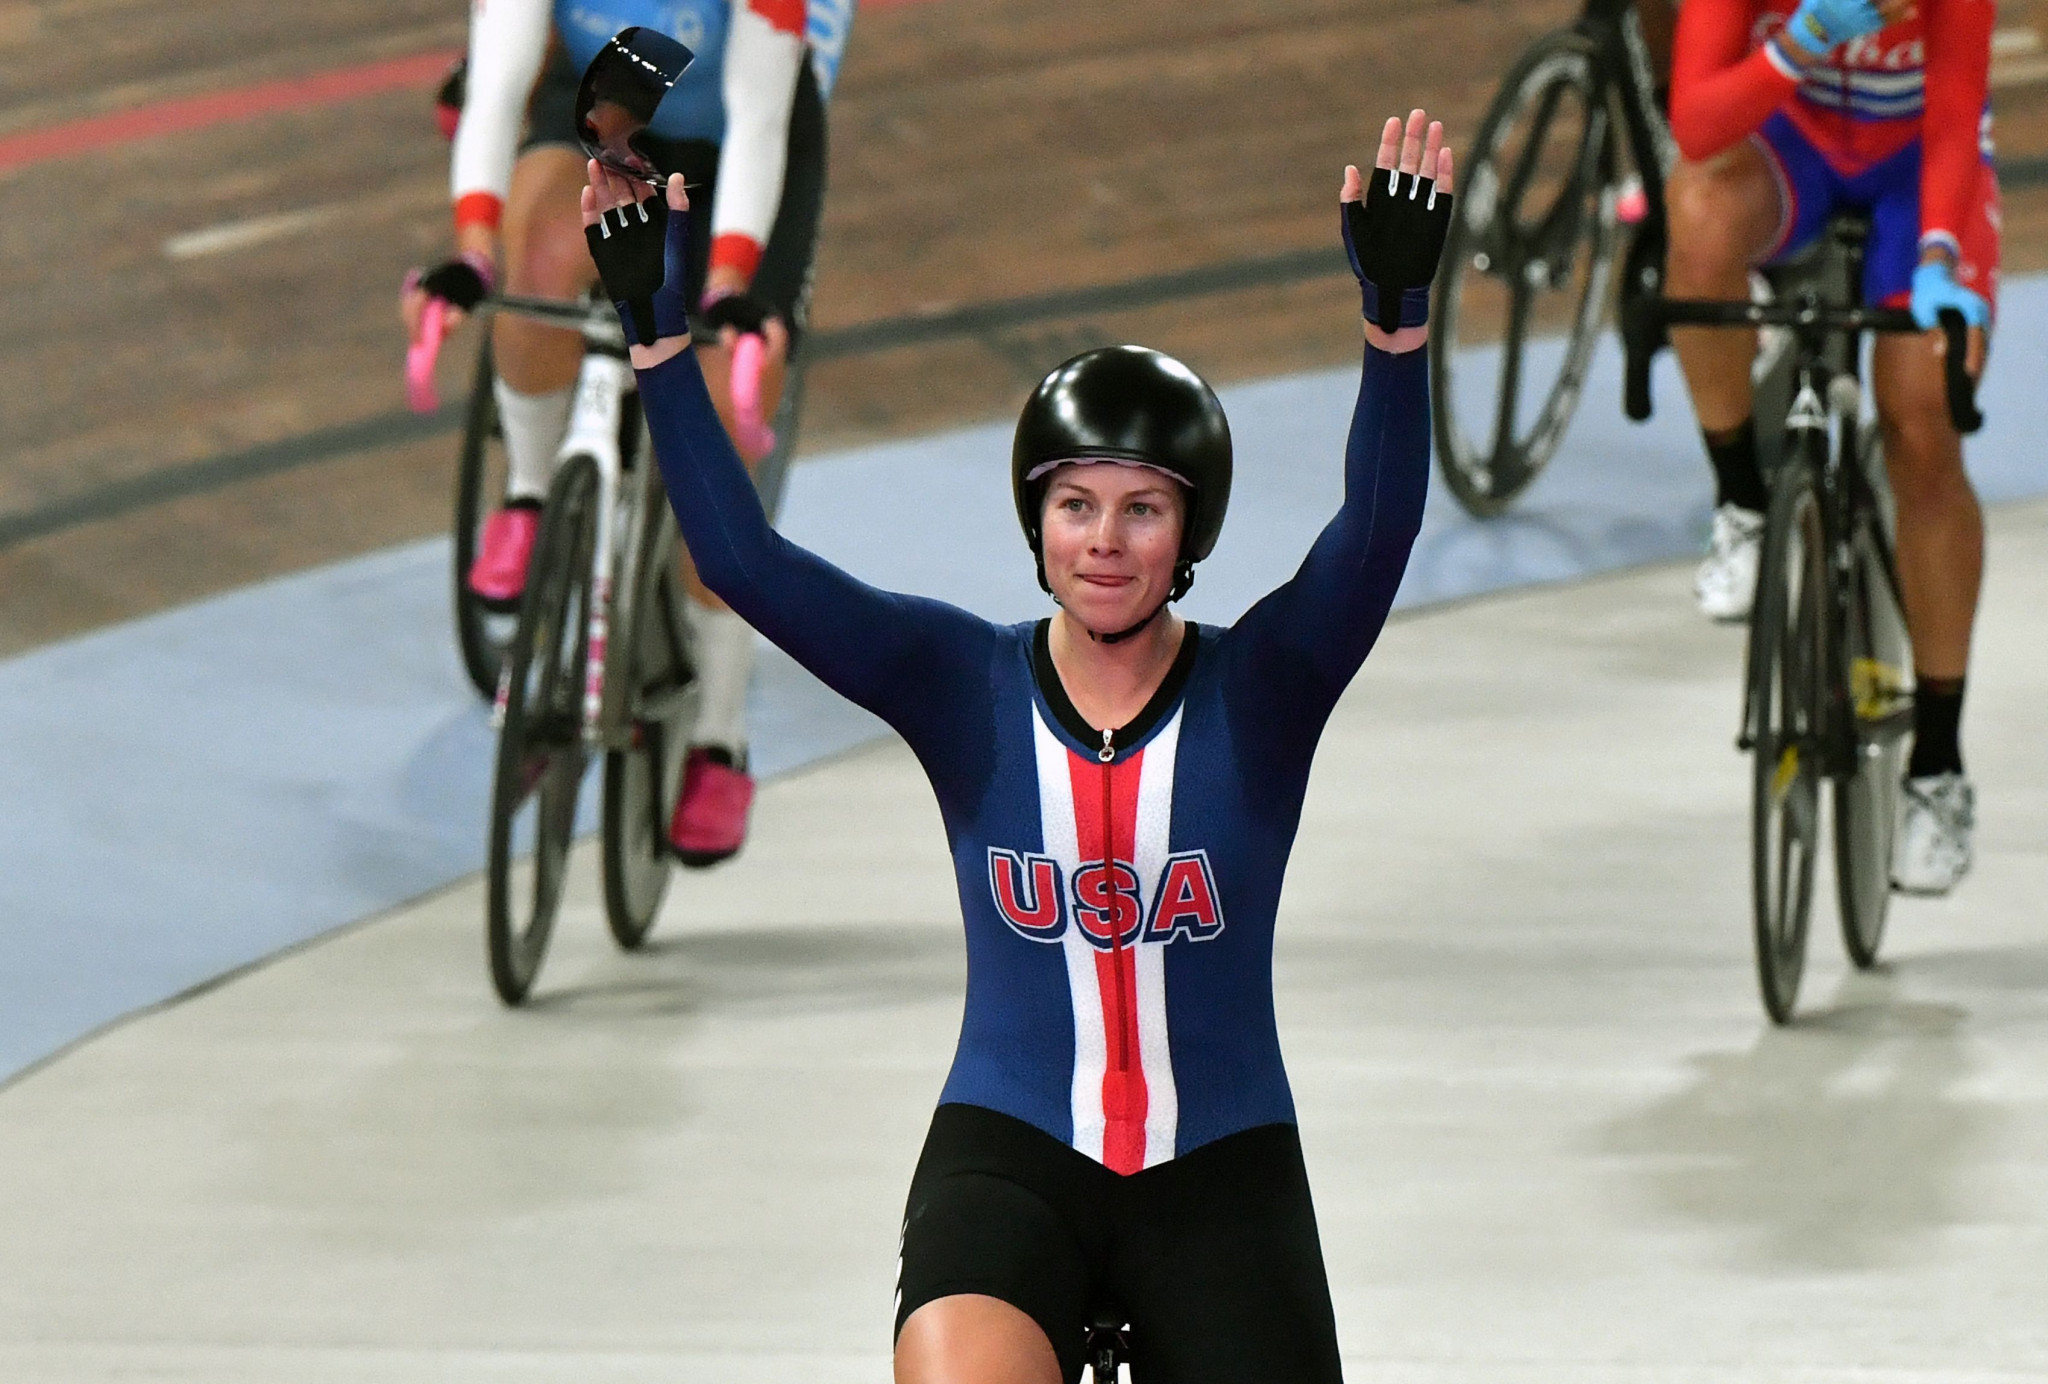 Jennifer Valente also won the omnium in dominant fashion ©Getty Images